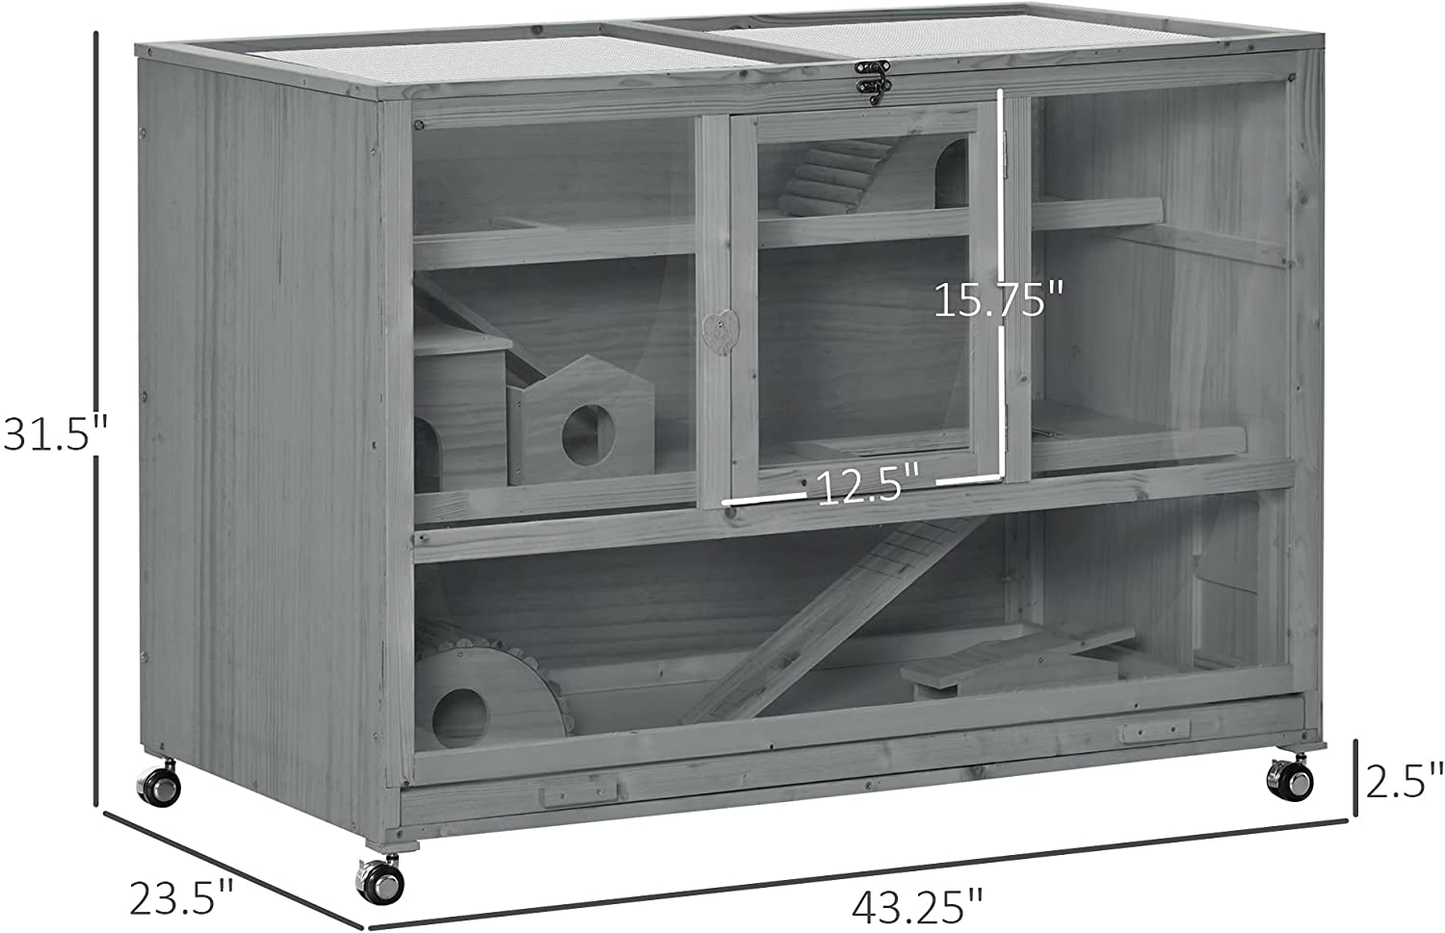 Pawhut 3-Level Wooden Hamster Cage, 43" Small Animal Hutch with Seesaw, Activity Center, Ladder, Feeding Bowl and Wheels, Dark Grey